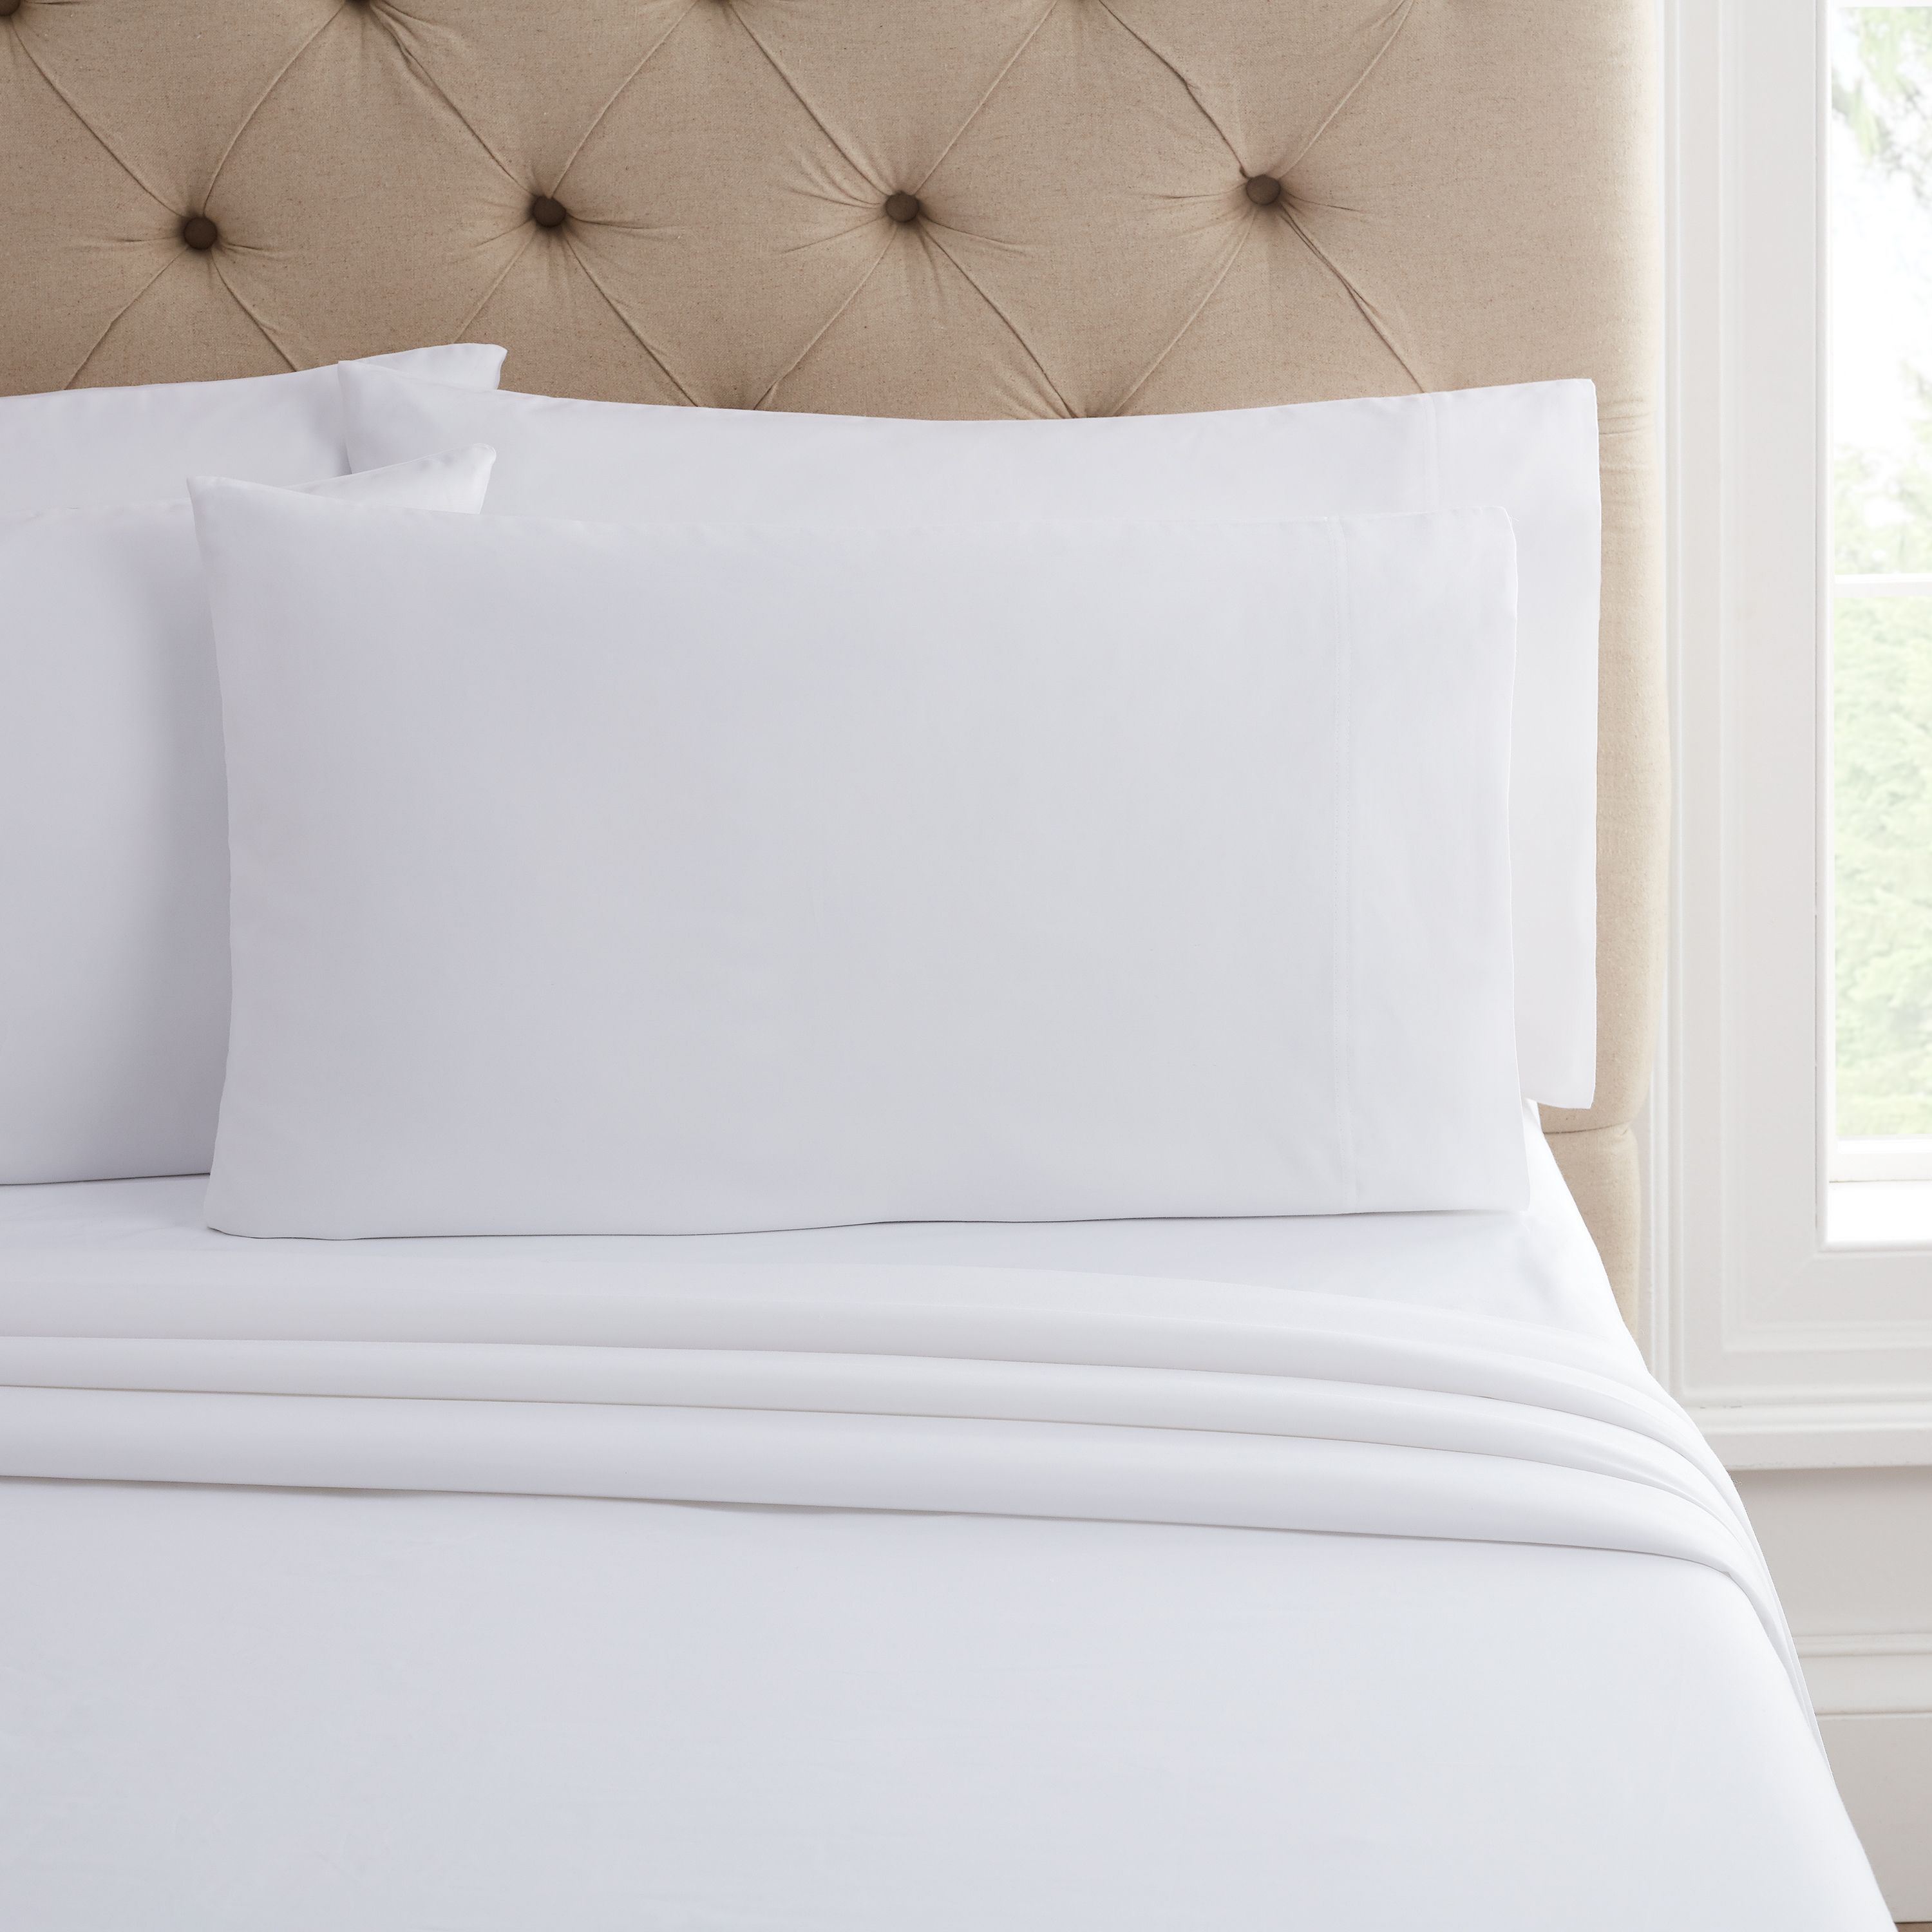 Hotel Style 1200 Thread Count Cotton Rich 6-Piece Sheet Set, White Color, King - image 2 of 7